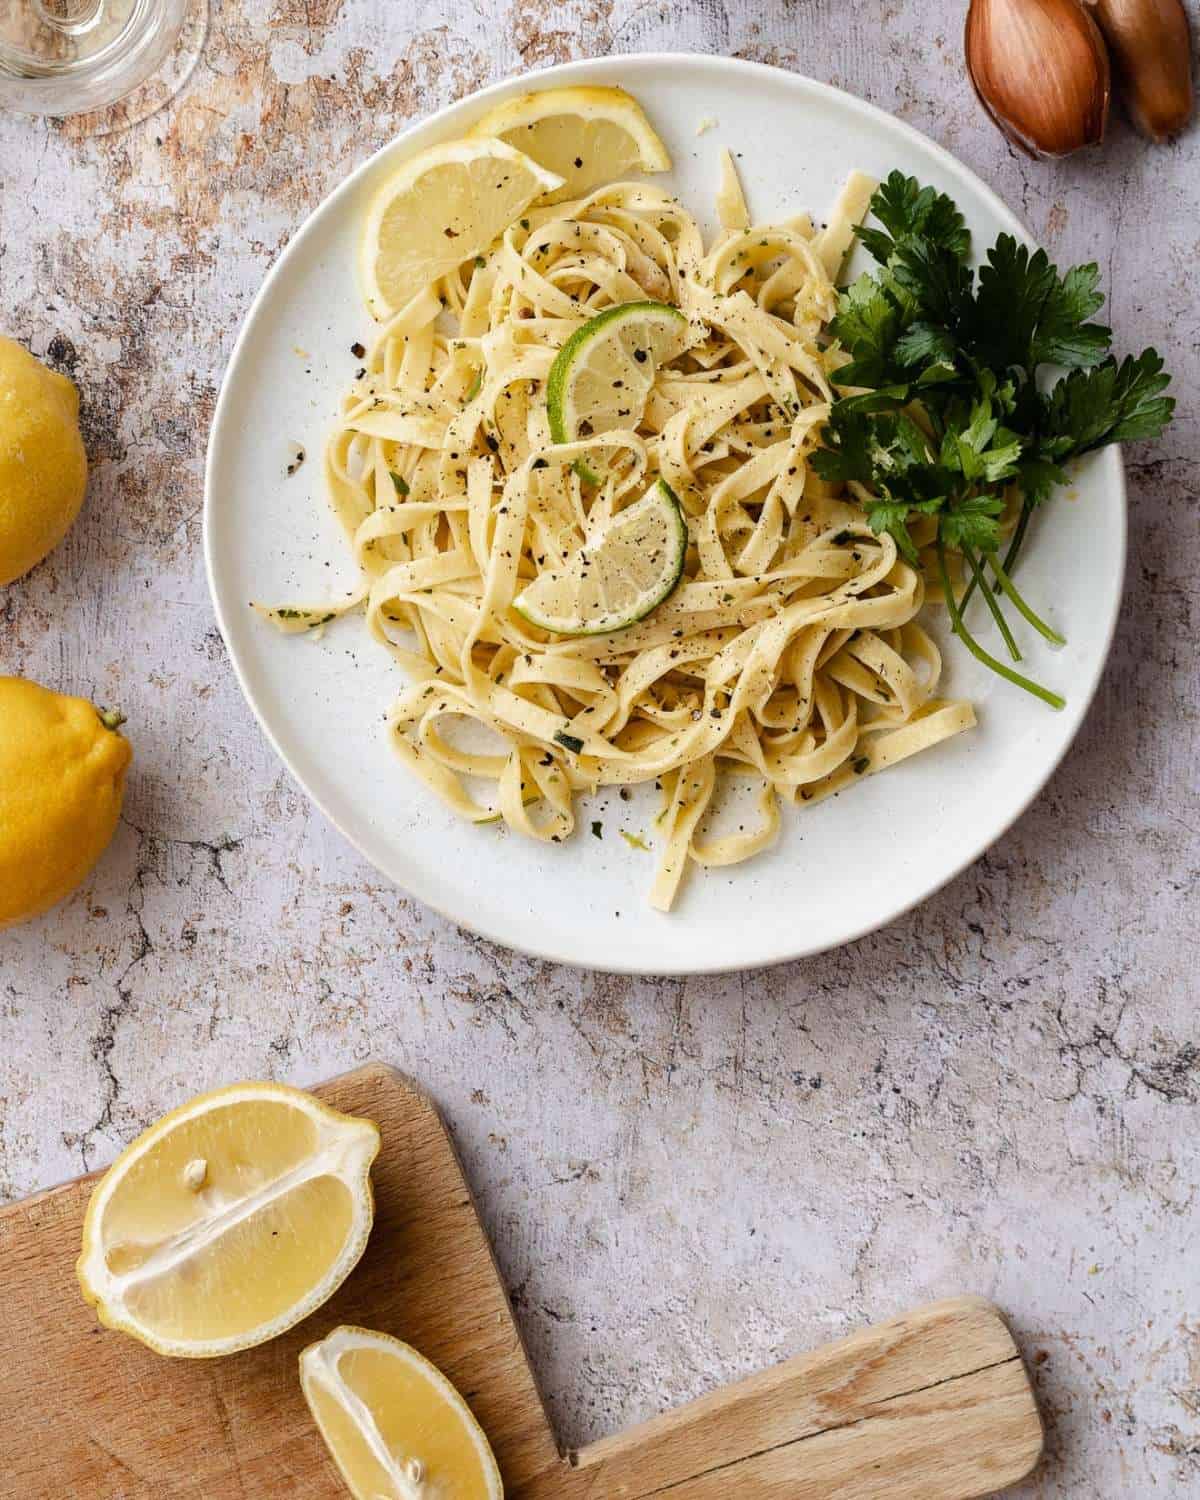 A view from above Lemon Tagliatelle in a white dish on a marble table. The dish is garnished with fresh parsley. On the side a sliced lemon on a wooden board